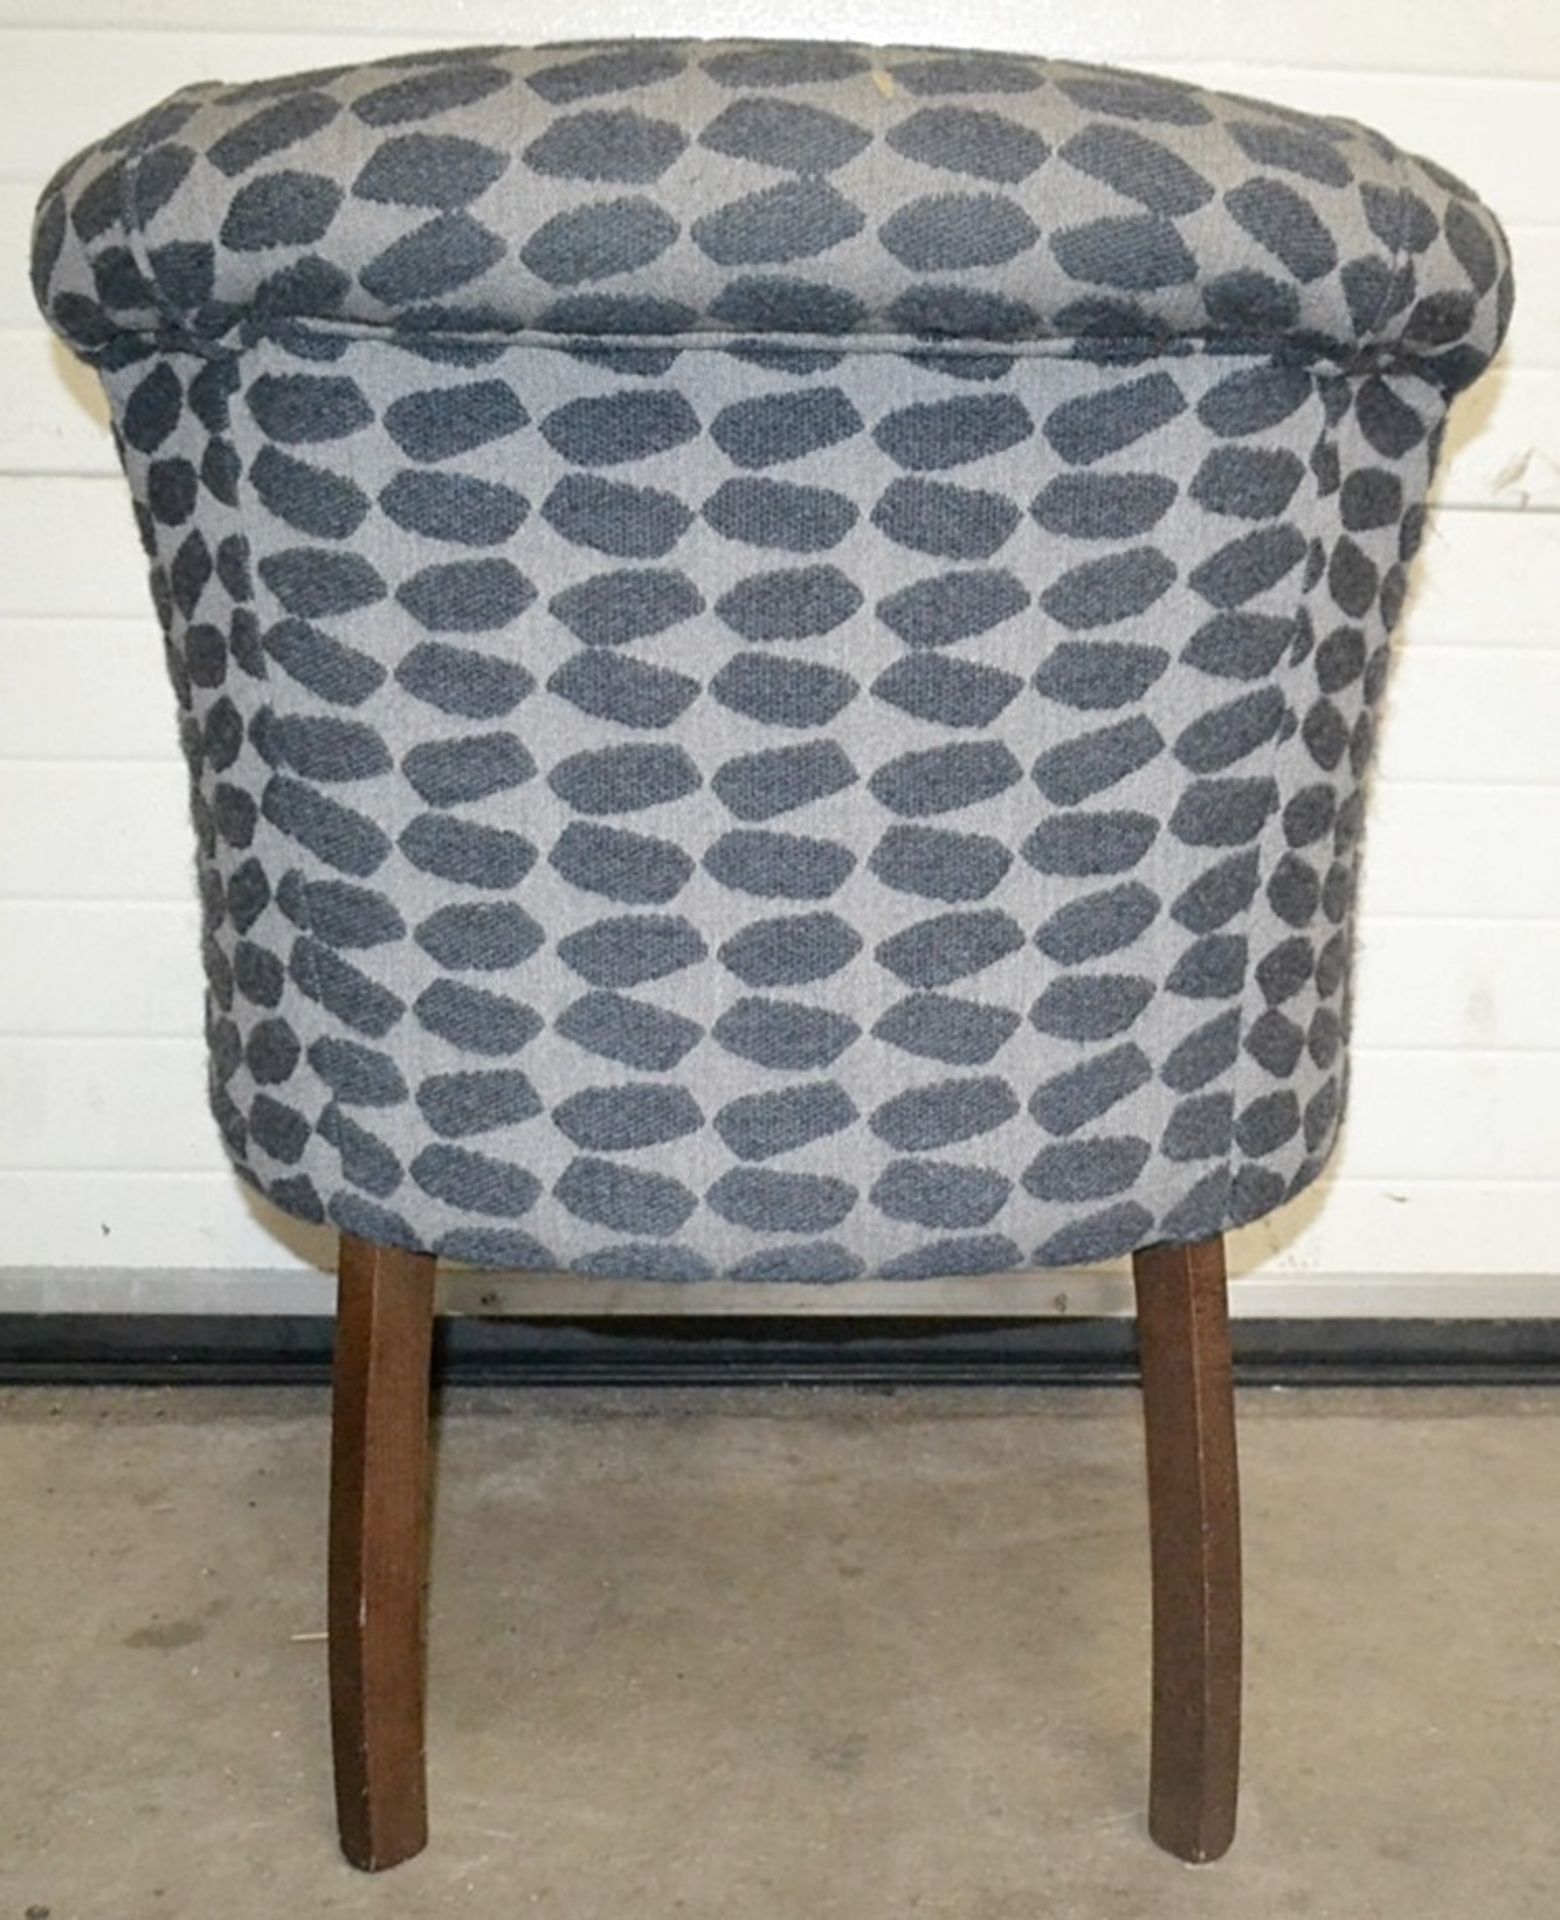 4 x Blue & Grey Upholstered Bar Chairs For Commercial Use - Dimensions (cm): W70 x D60, Back - Image 4 of 6